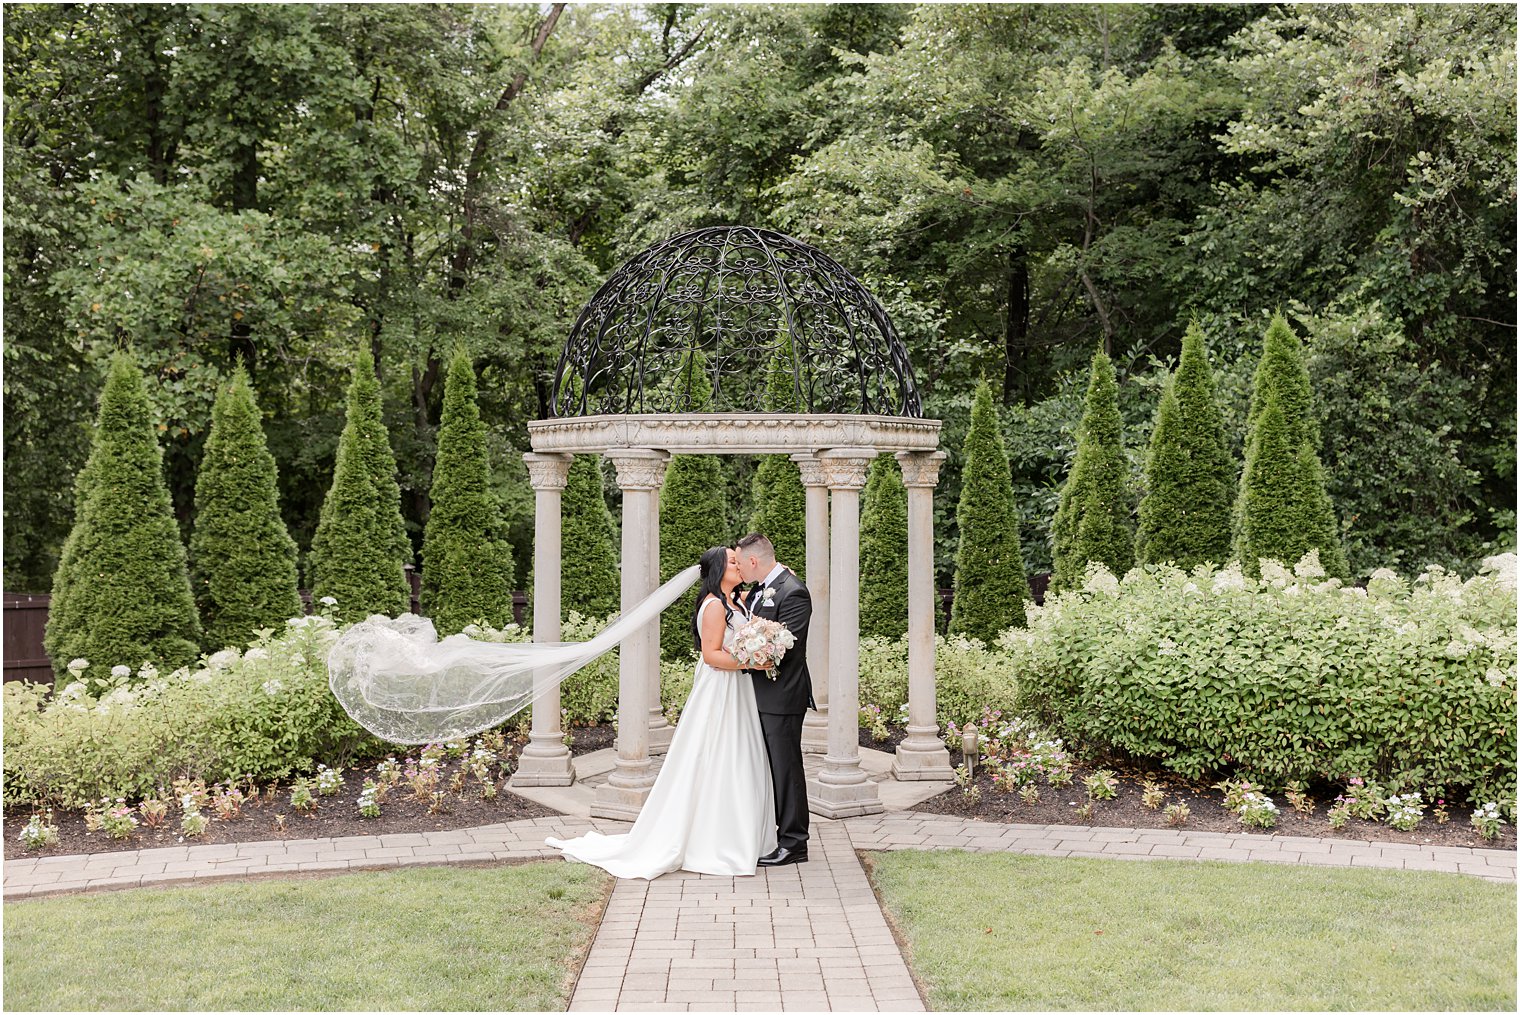 bride and groom kiss by gazebo with wrought iron top